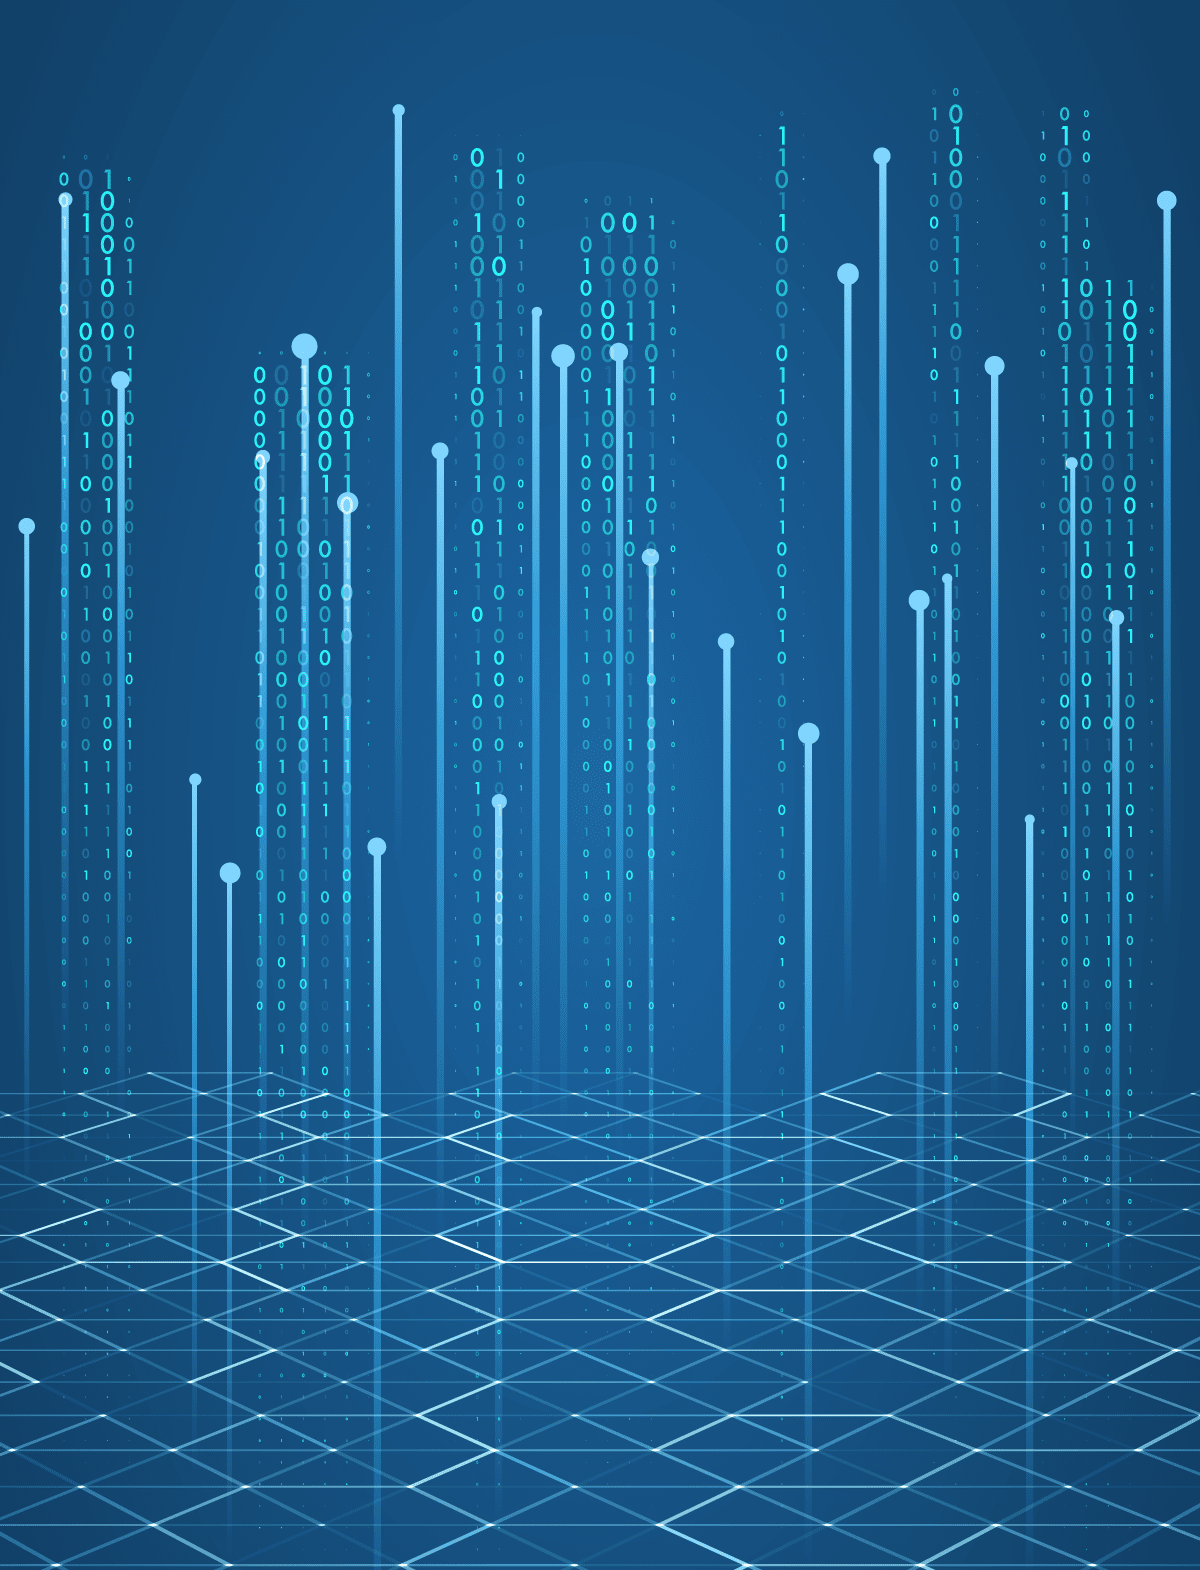 This illustration shows thin pale blue lines with pale blue dots and also ones and zeroes cascading vertically on a darker blue background. It elicits a sense of abstract high-tech. This image relates to content about the AML software and GRC software solutions of AML Partners and its RegTechONE platform for AML software.